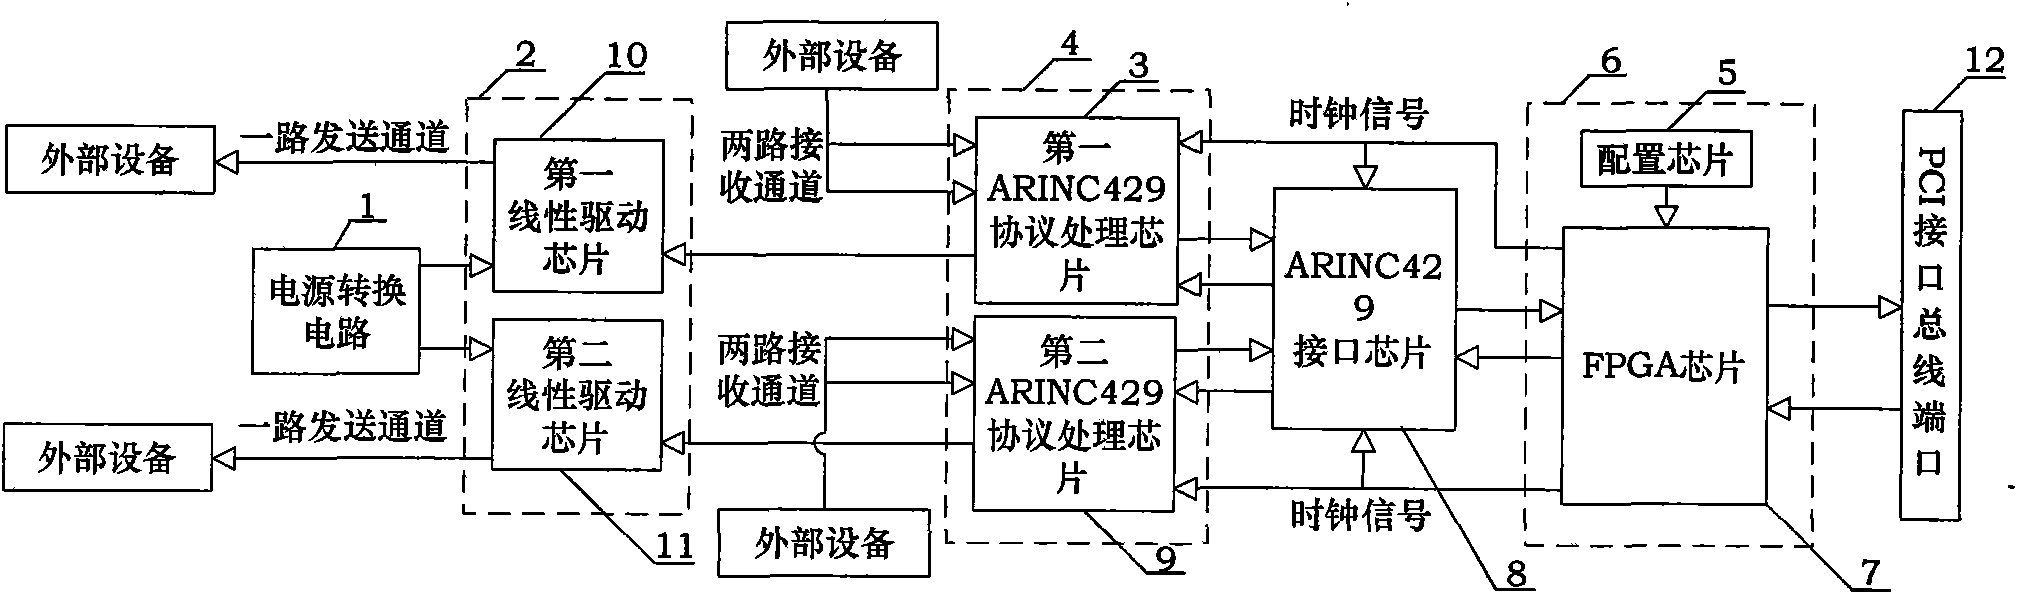 PCI integrated circuit board device used for ARINC429 communication